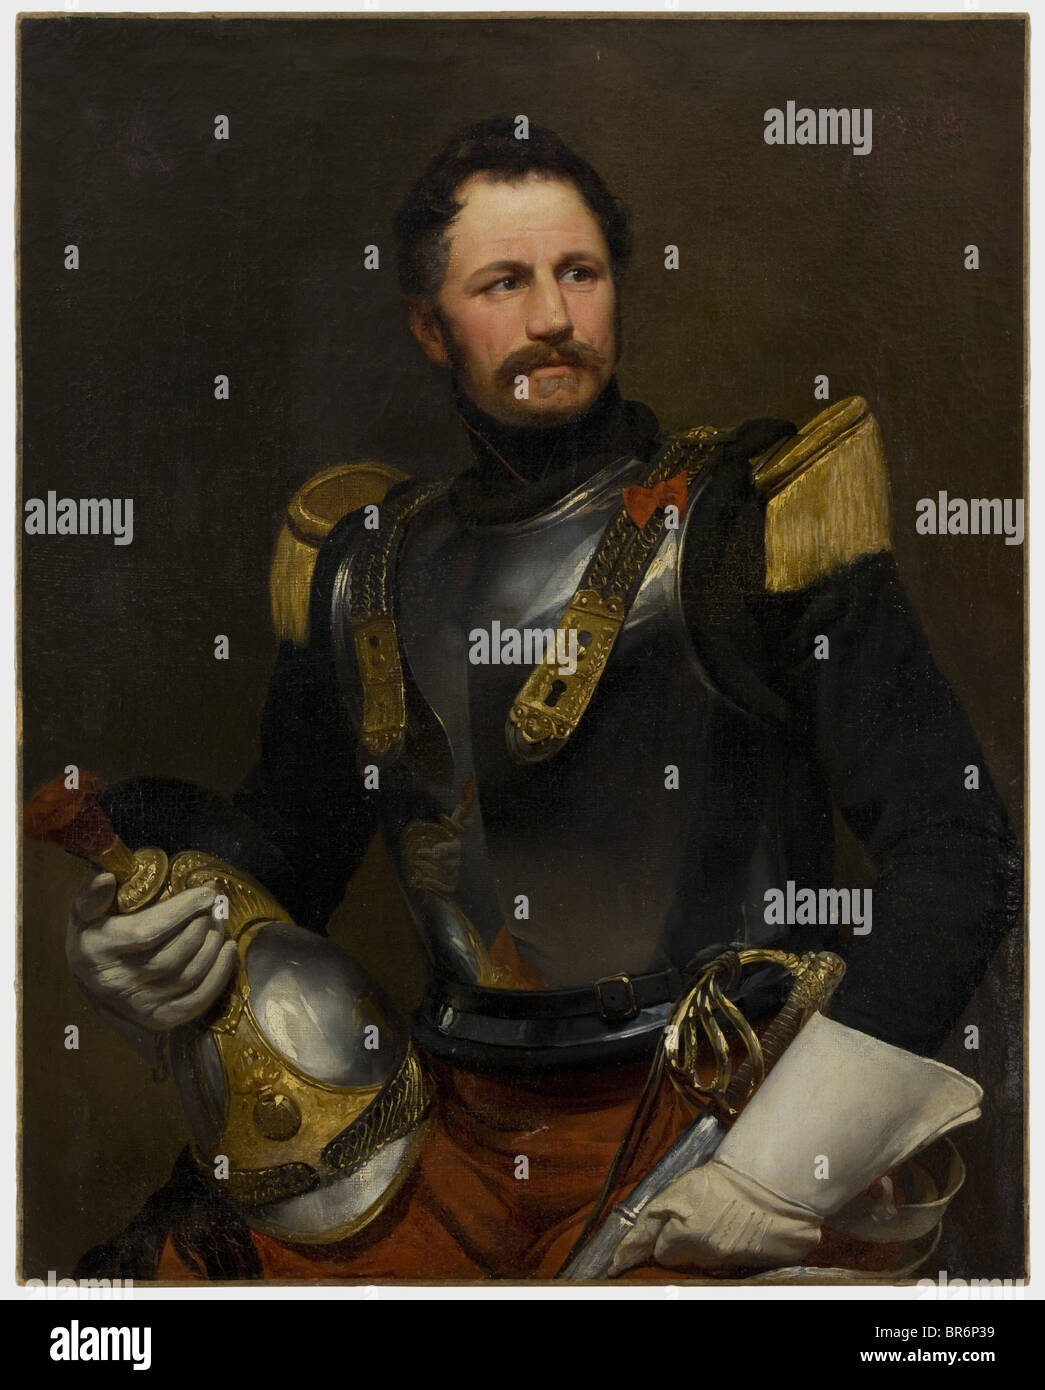 A portrait of a cuirassier officer, ca. 1900 - 1910. Oil on canvas. Officer in a cuirassier uniform with helmet, sabre and decoration of the Legion of Honour. Mounted on a wood construction, unframed. Dimensions 93 x 74 cm. fine arts, people, 1910s, 20th century, object, objects, stills, clipping, clippings, cut out, cut-out, cut-outs, painting, paintings, fine arts, art, illustrations, man, men, male, Artist's Copyright has not to be cleared Stock Photo